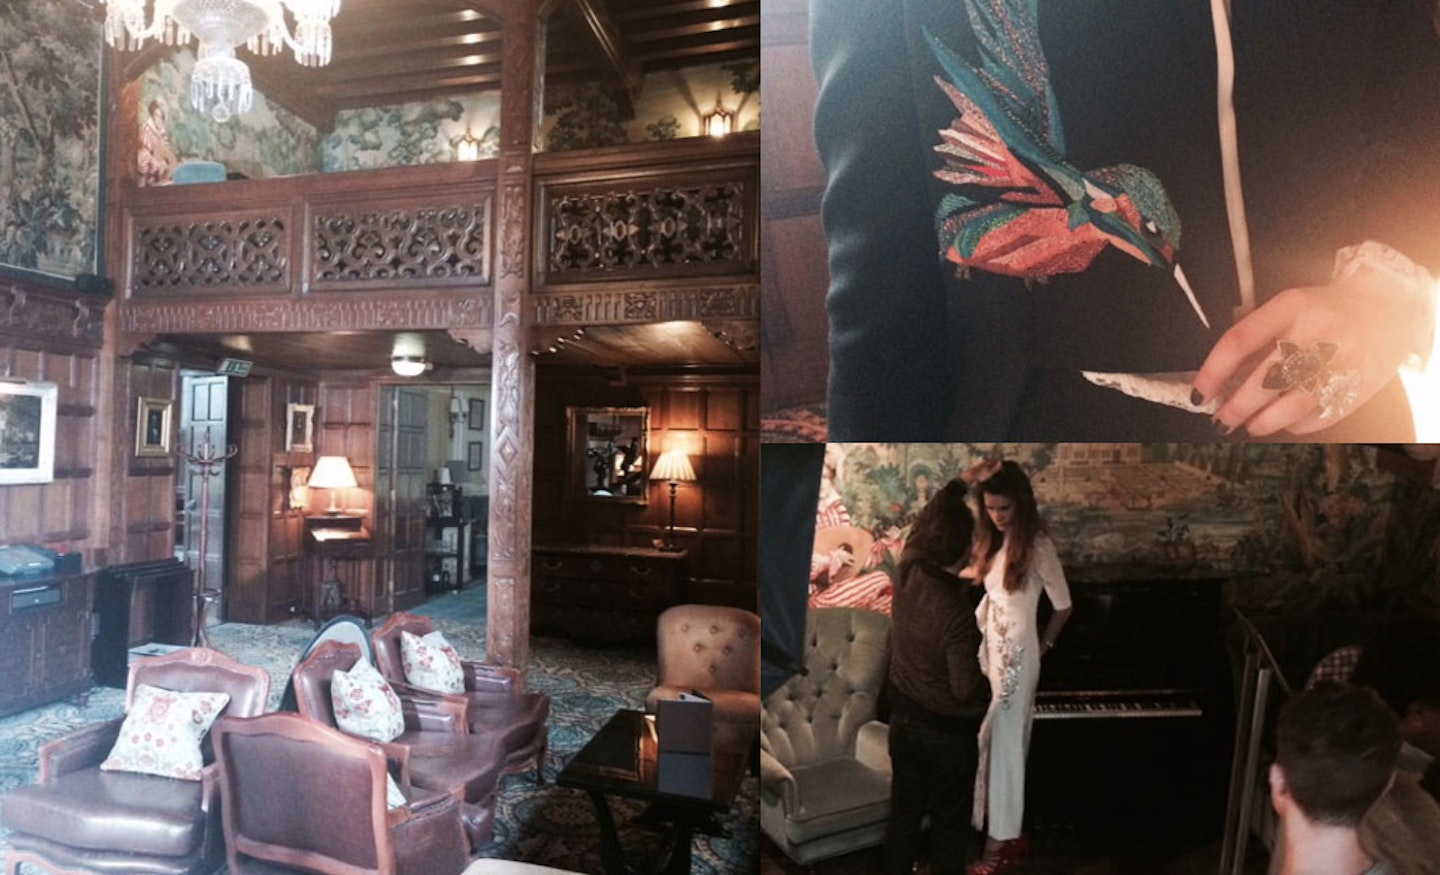 Hanbury Manor's Jacobean Architecture Made For The Perfect Backdrop